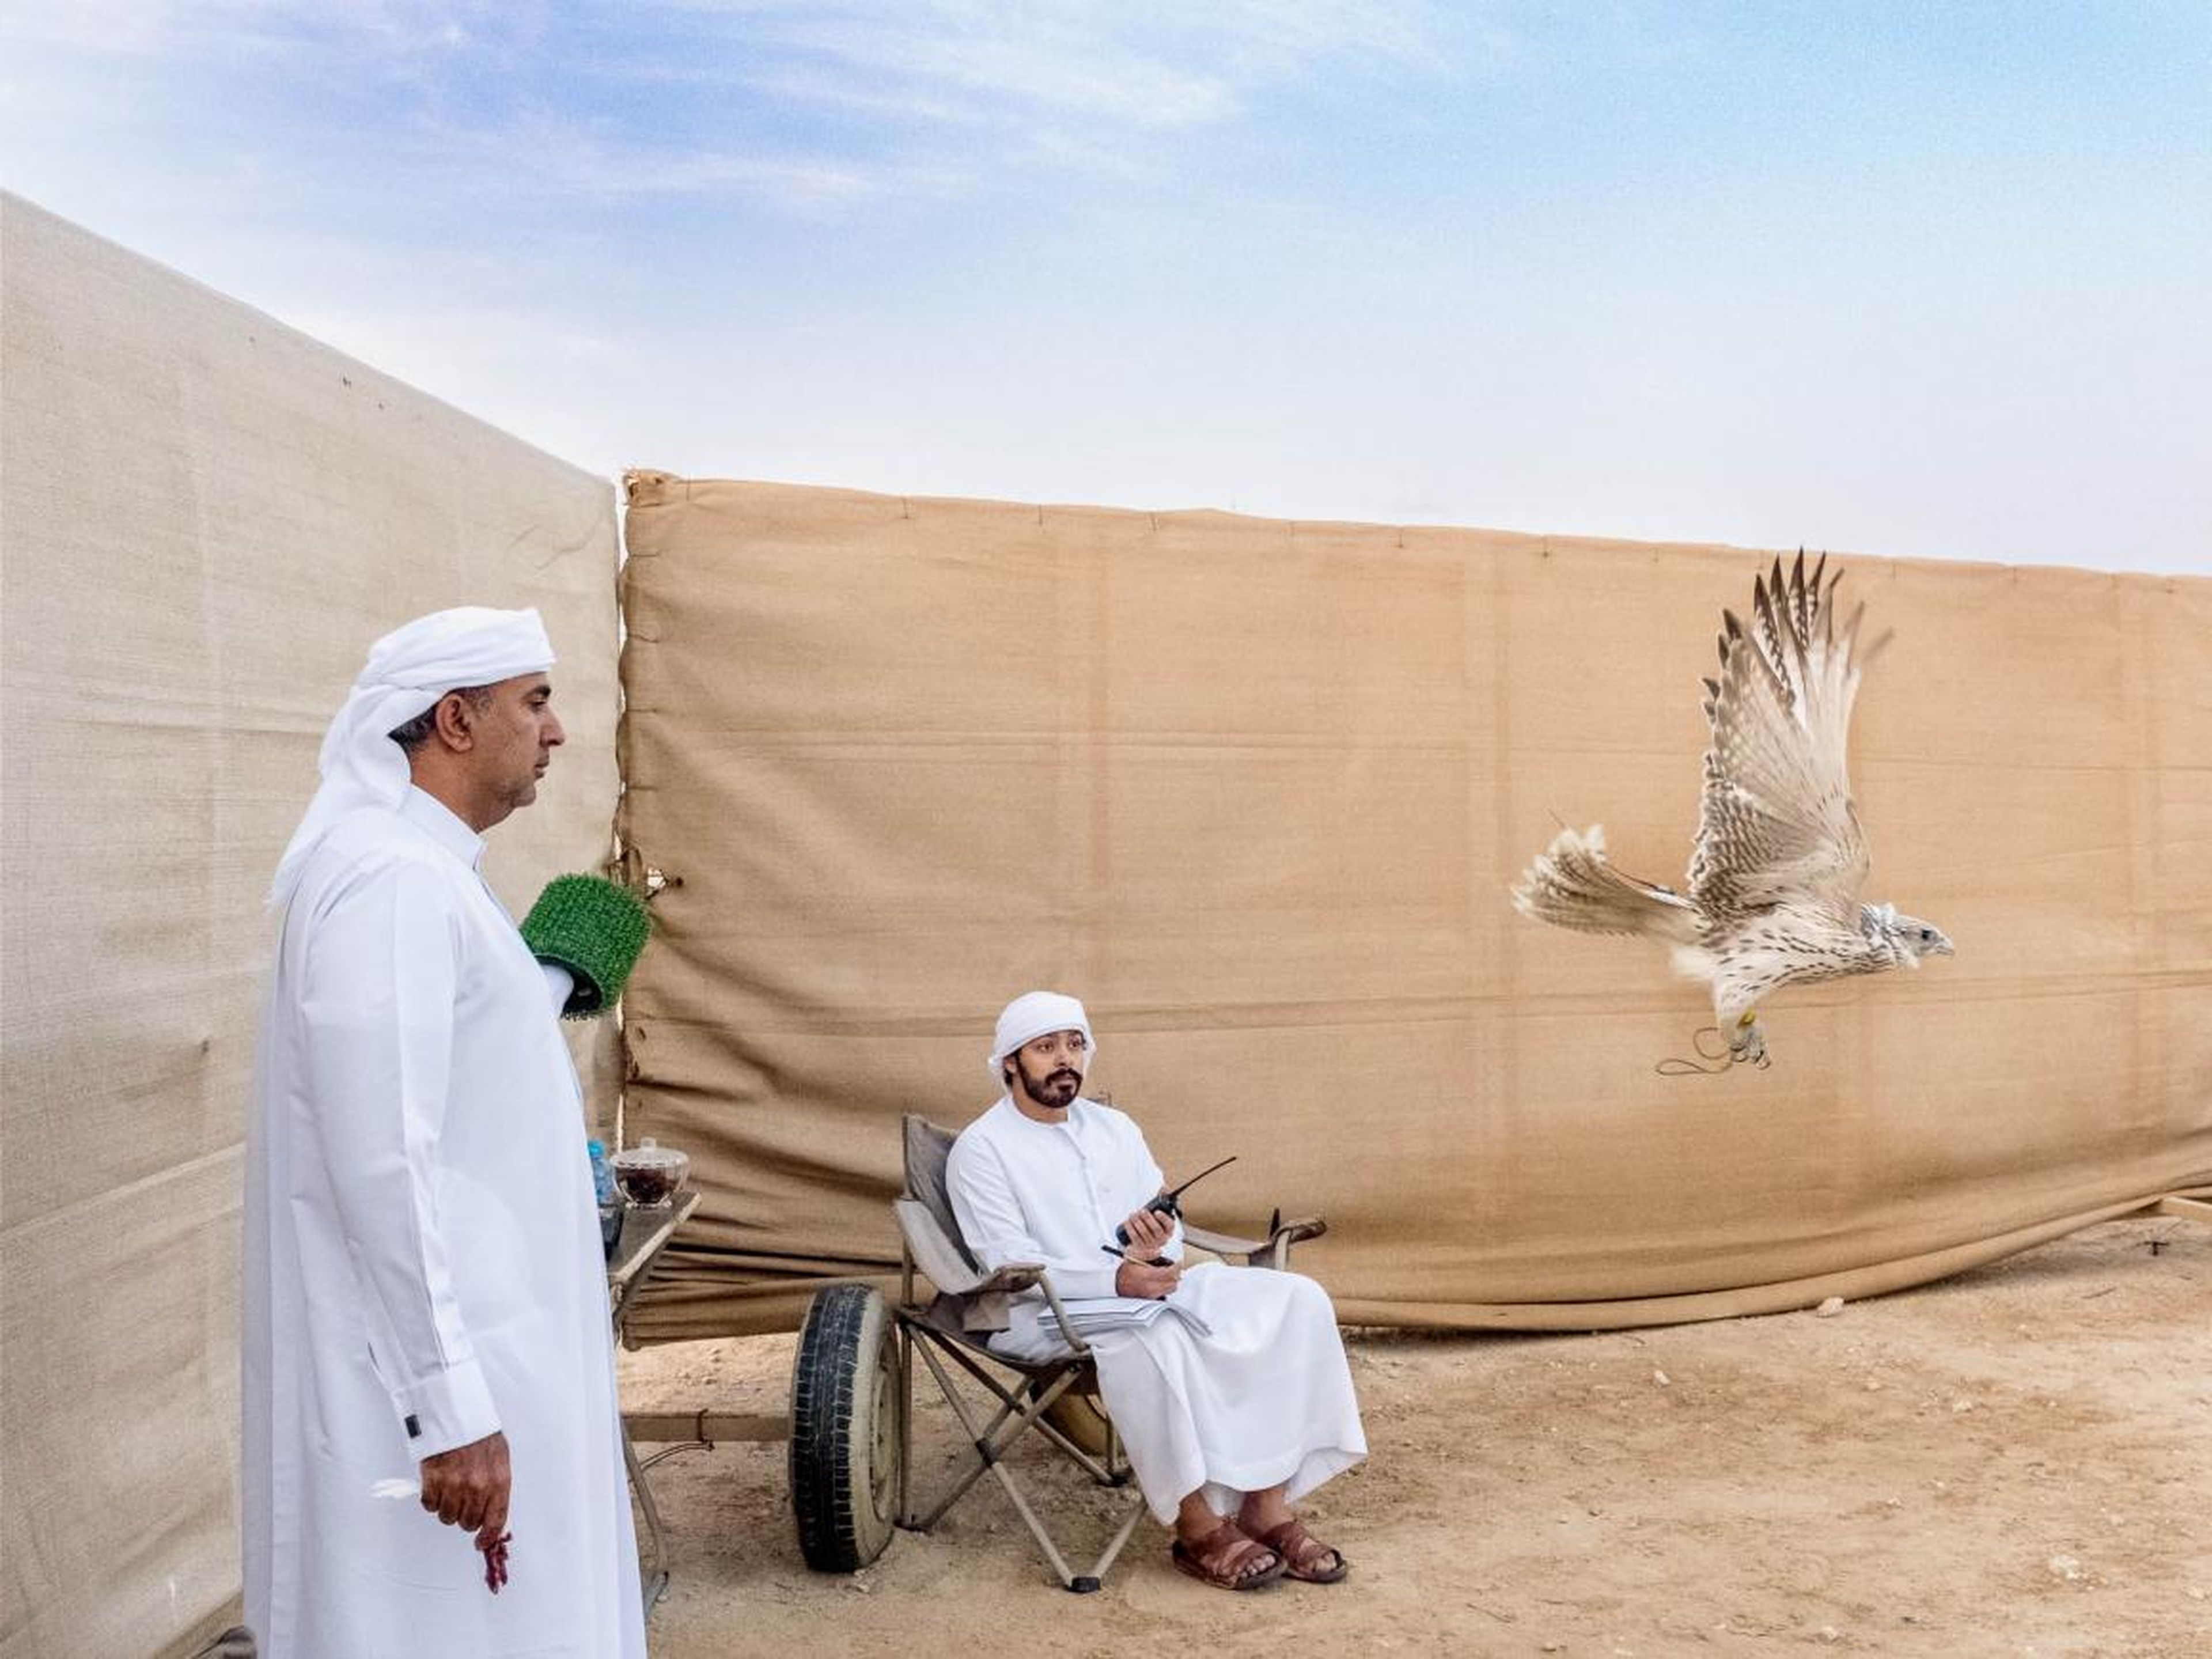 The last leg of my trip started in the United Arab Emirates. After spending close to two weeks in Dubai, I took a day trip to Abu Dhabi to wake up at dawn and watch falconers train their falcons. Falconry has a central role in